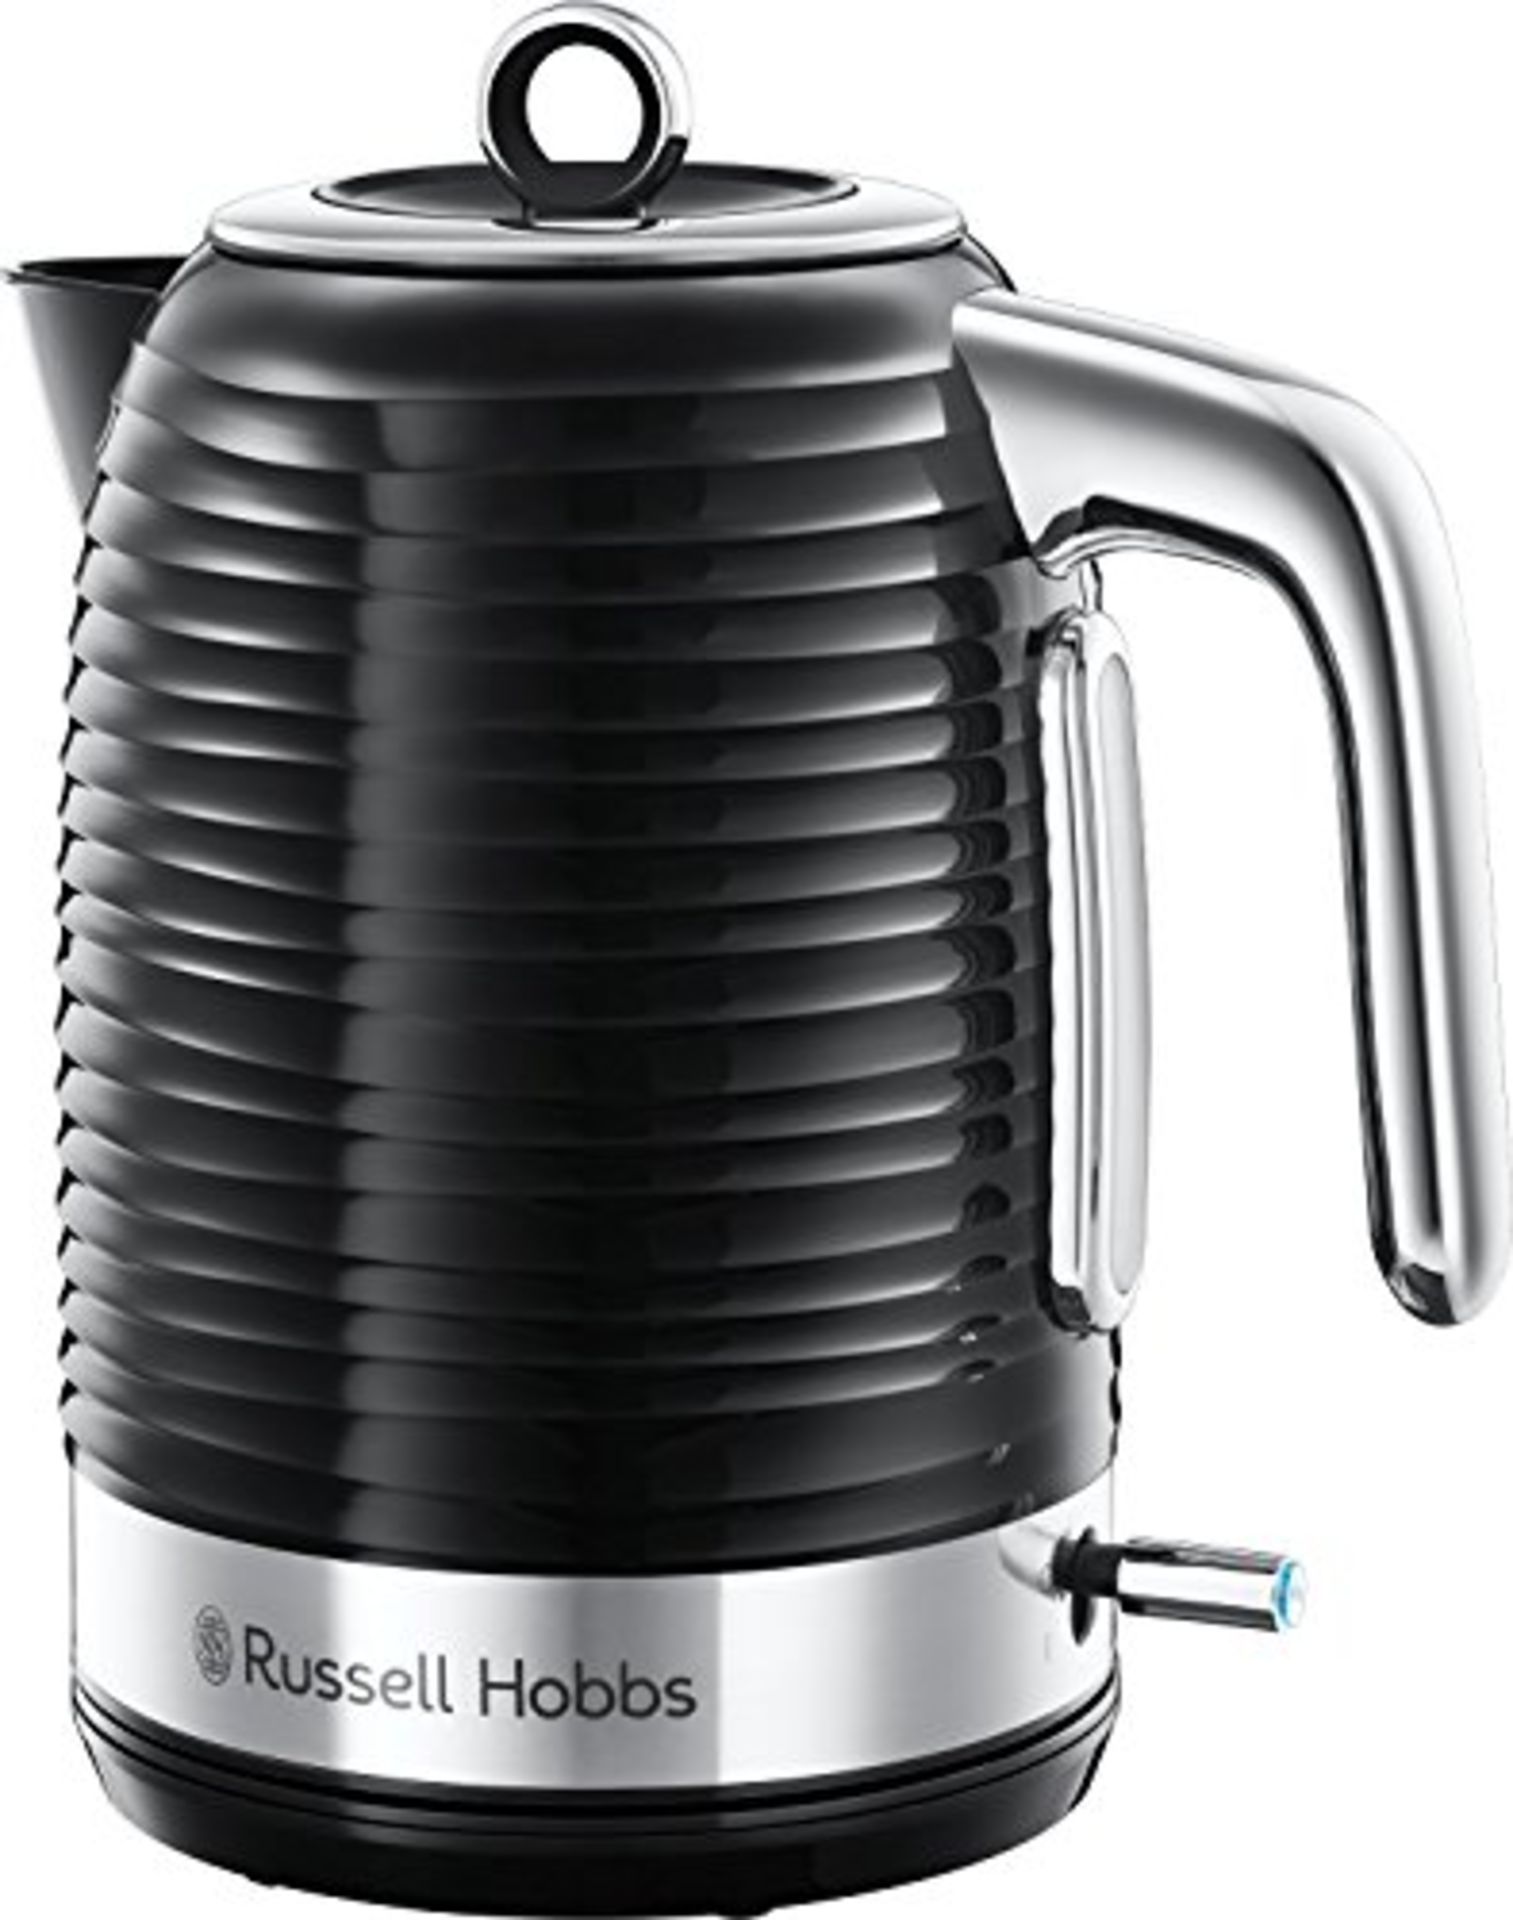 Russell Hobbs 24361 Inspire Electric Fast Boil Kettle, 3000 W, 1.7 Litre, Black with C